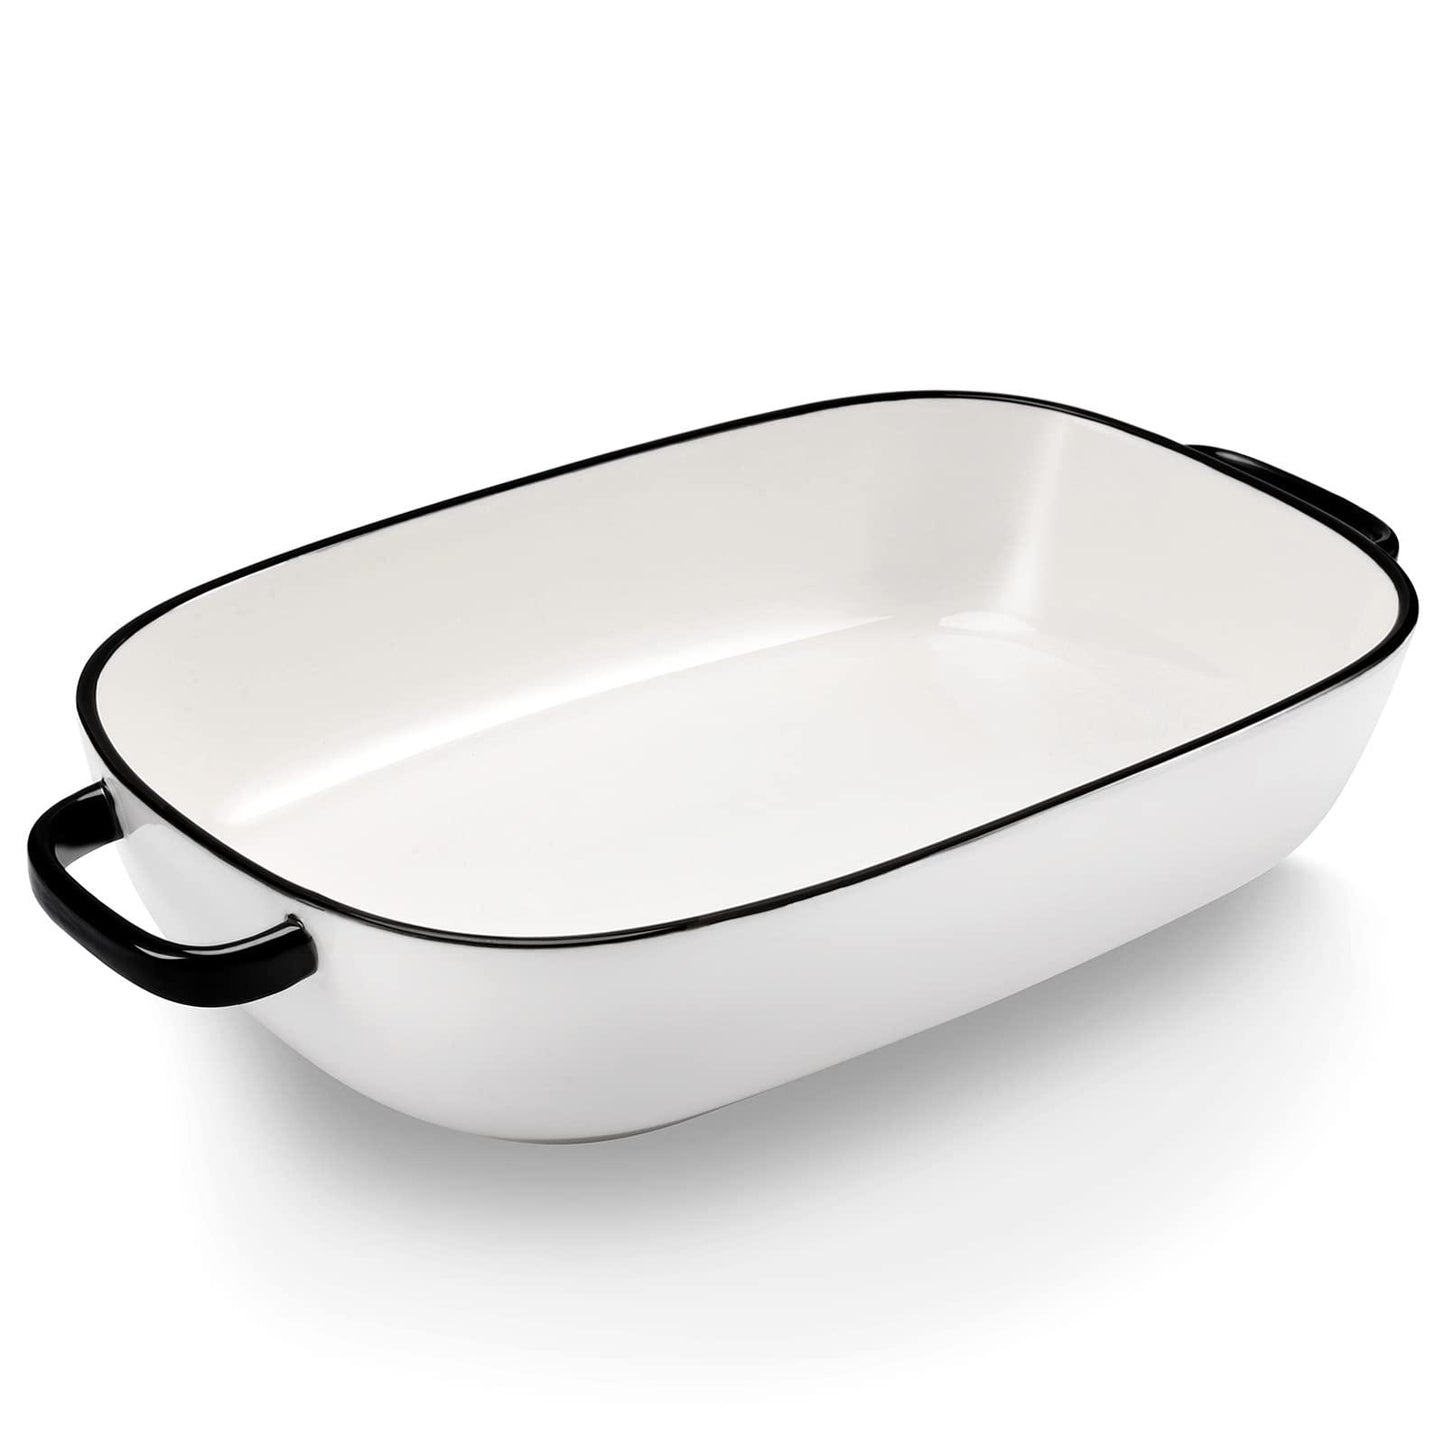 6 Quart Large Rectangular Baking Dish, 16x11 Inches Ceramic Baking Pan Casserole Dish for Cooking,Kitchen and Daily Use, Safe for Oven Microwave Refrigerator Disinfection Cabinet and Dishwasher,White - CookCave